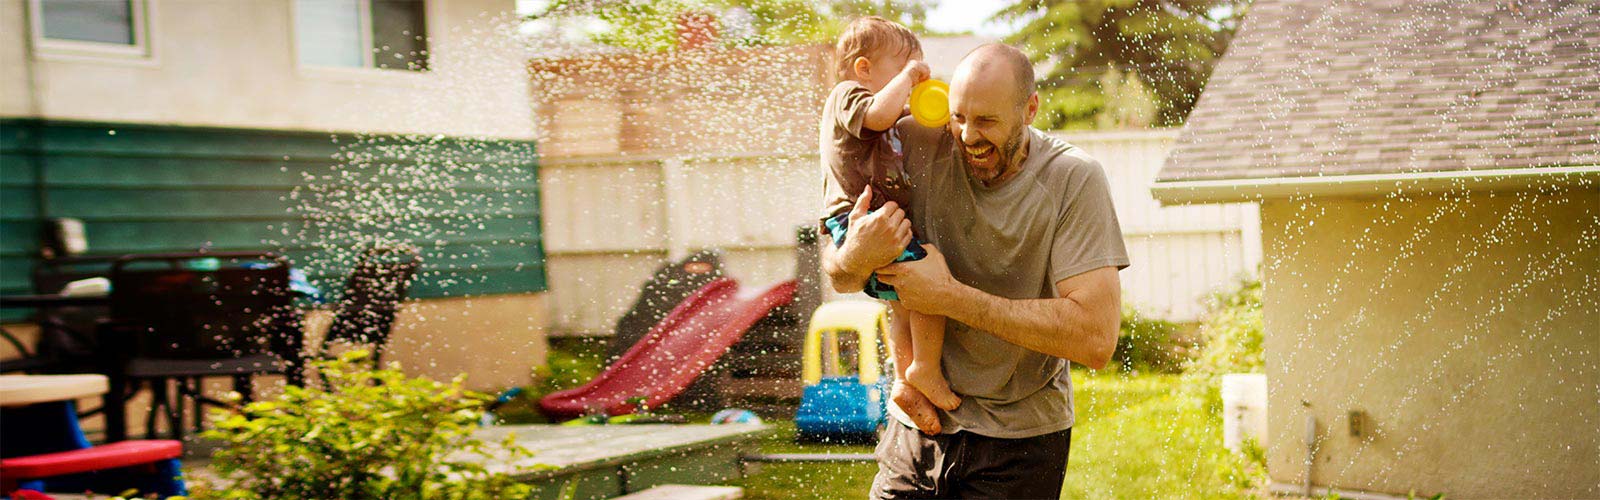 Father carrying son through water sprinkler backyard building